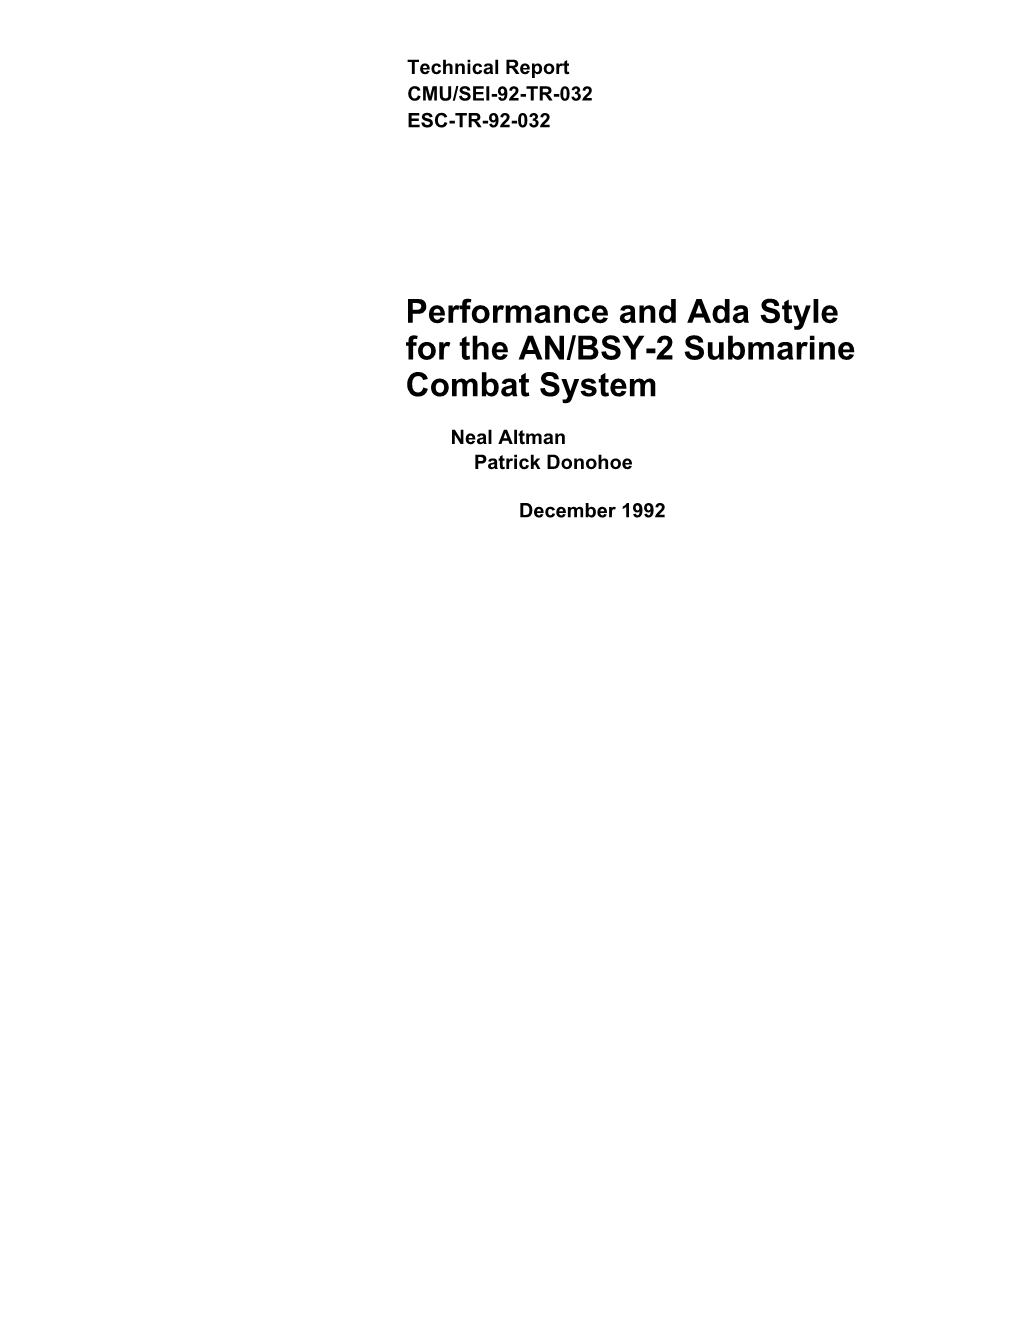 Performance and Ada Style for the AN/BSY-2 Submarine Combat System